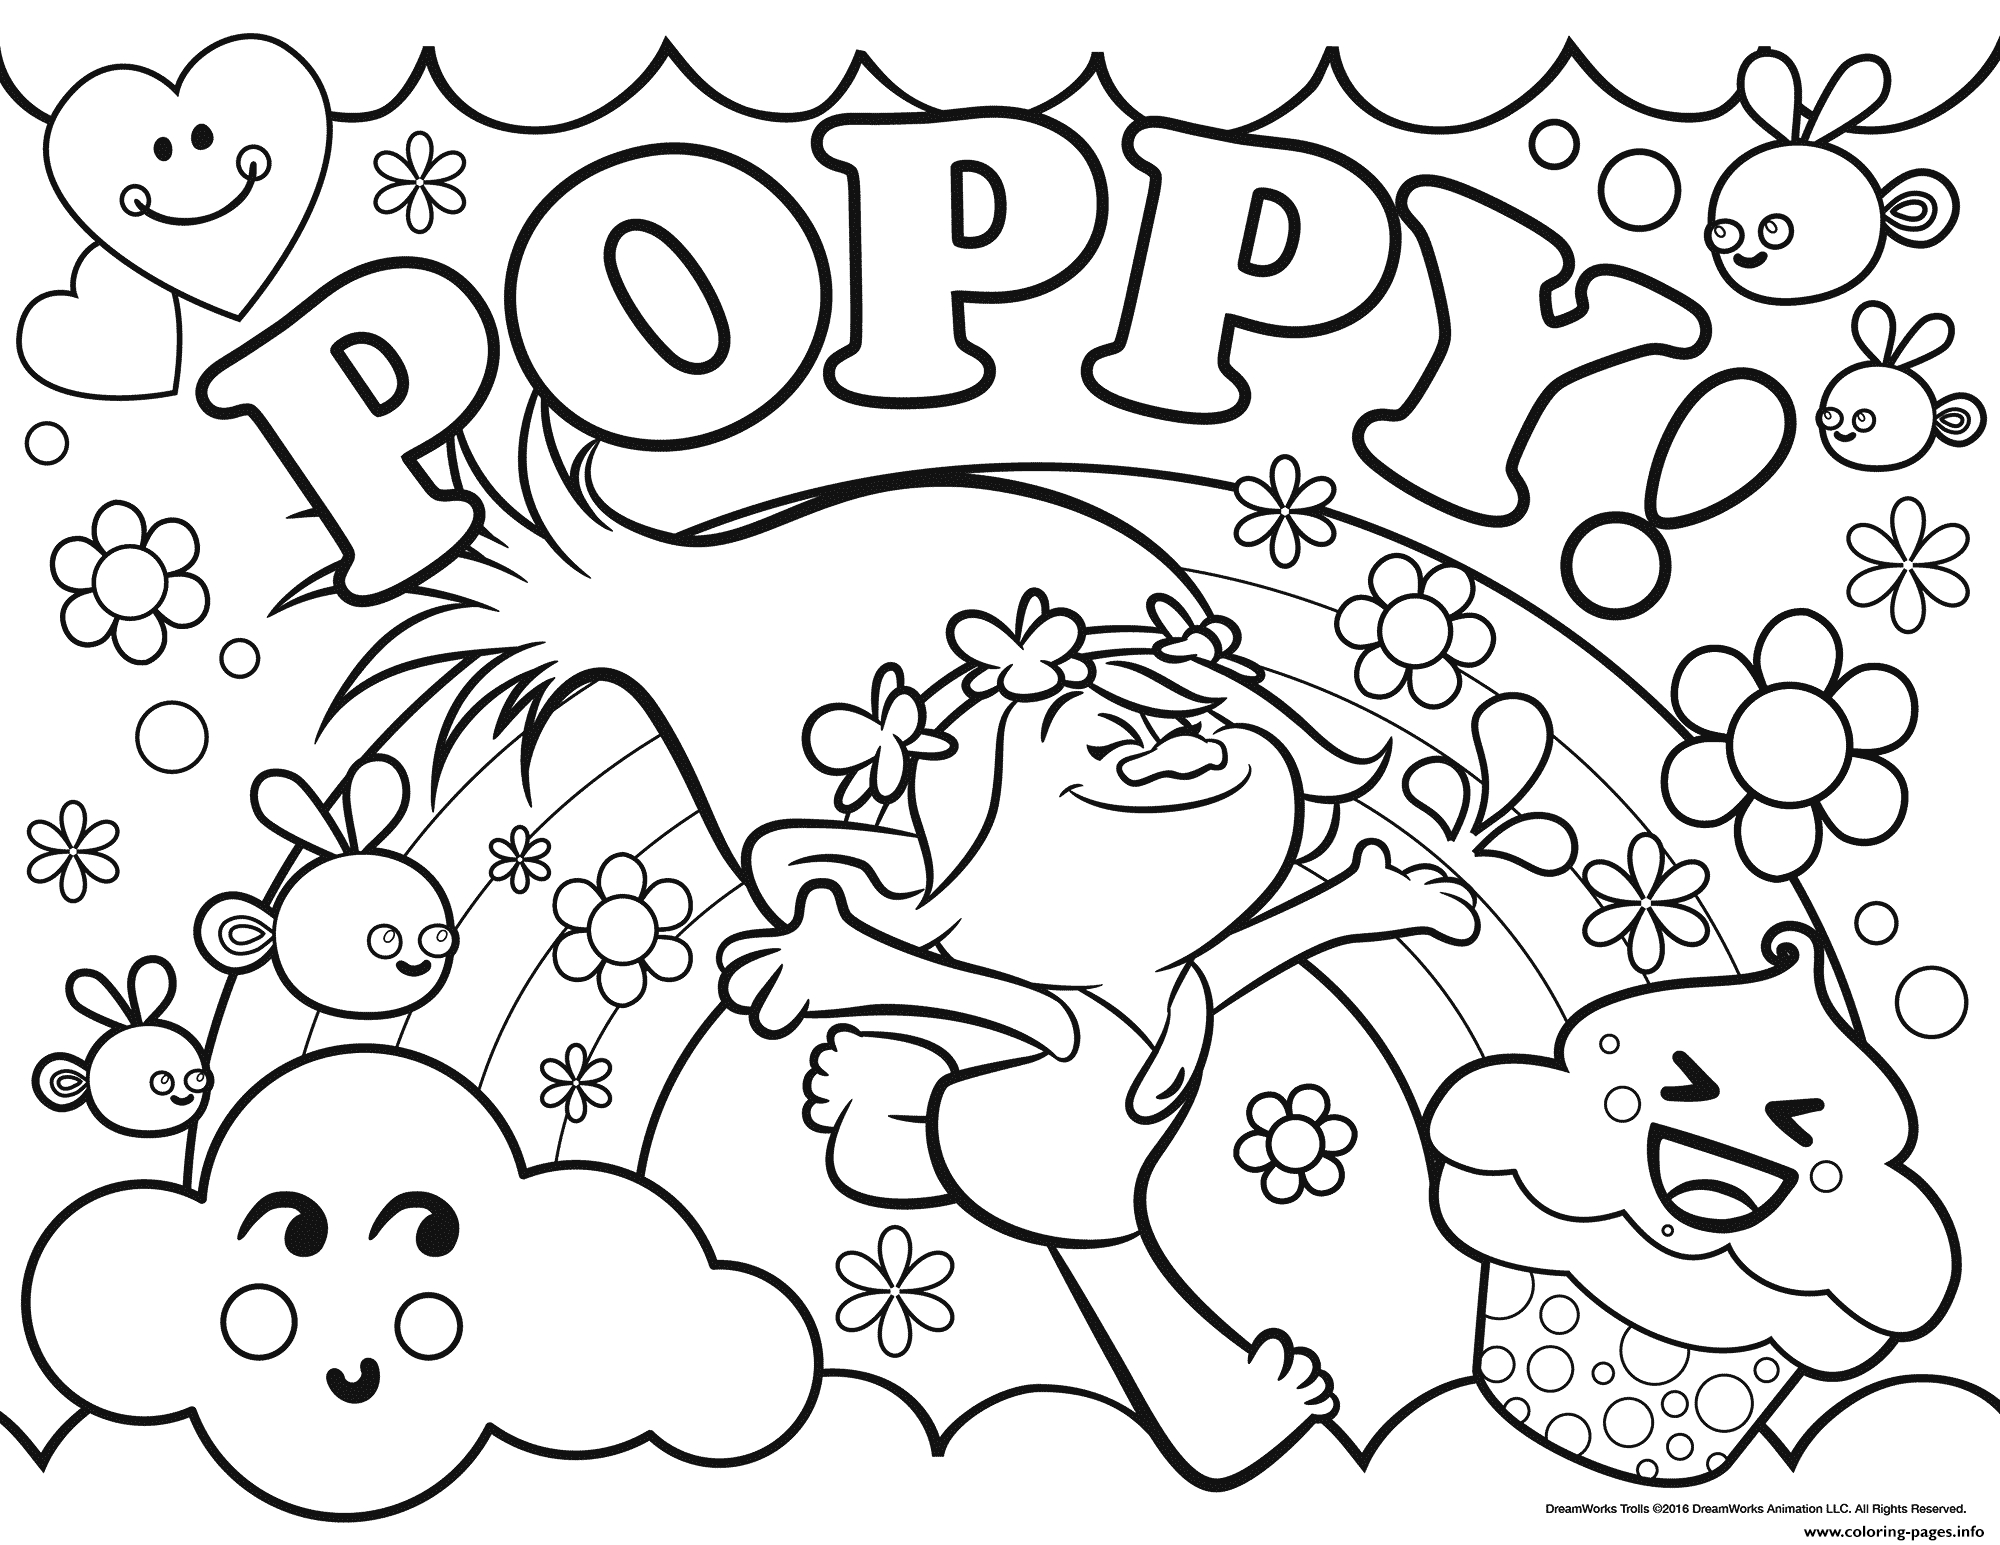 Coloring Pages : Trolls Poppy Coloring Pagestable For Kids Branch - Free Printable Troll Coloring Pages